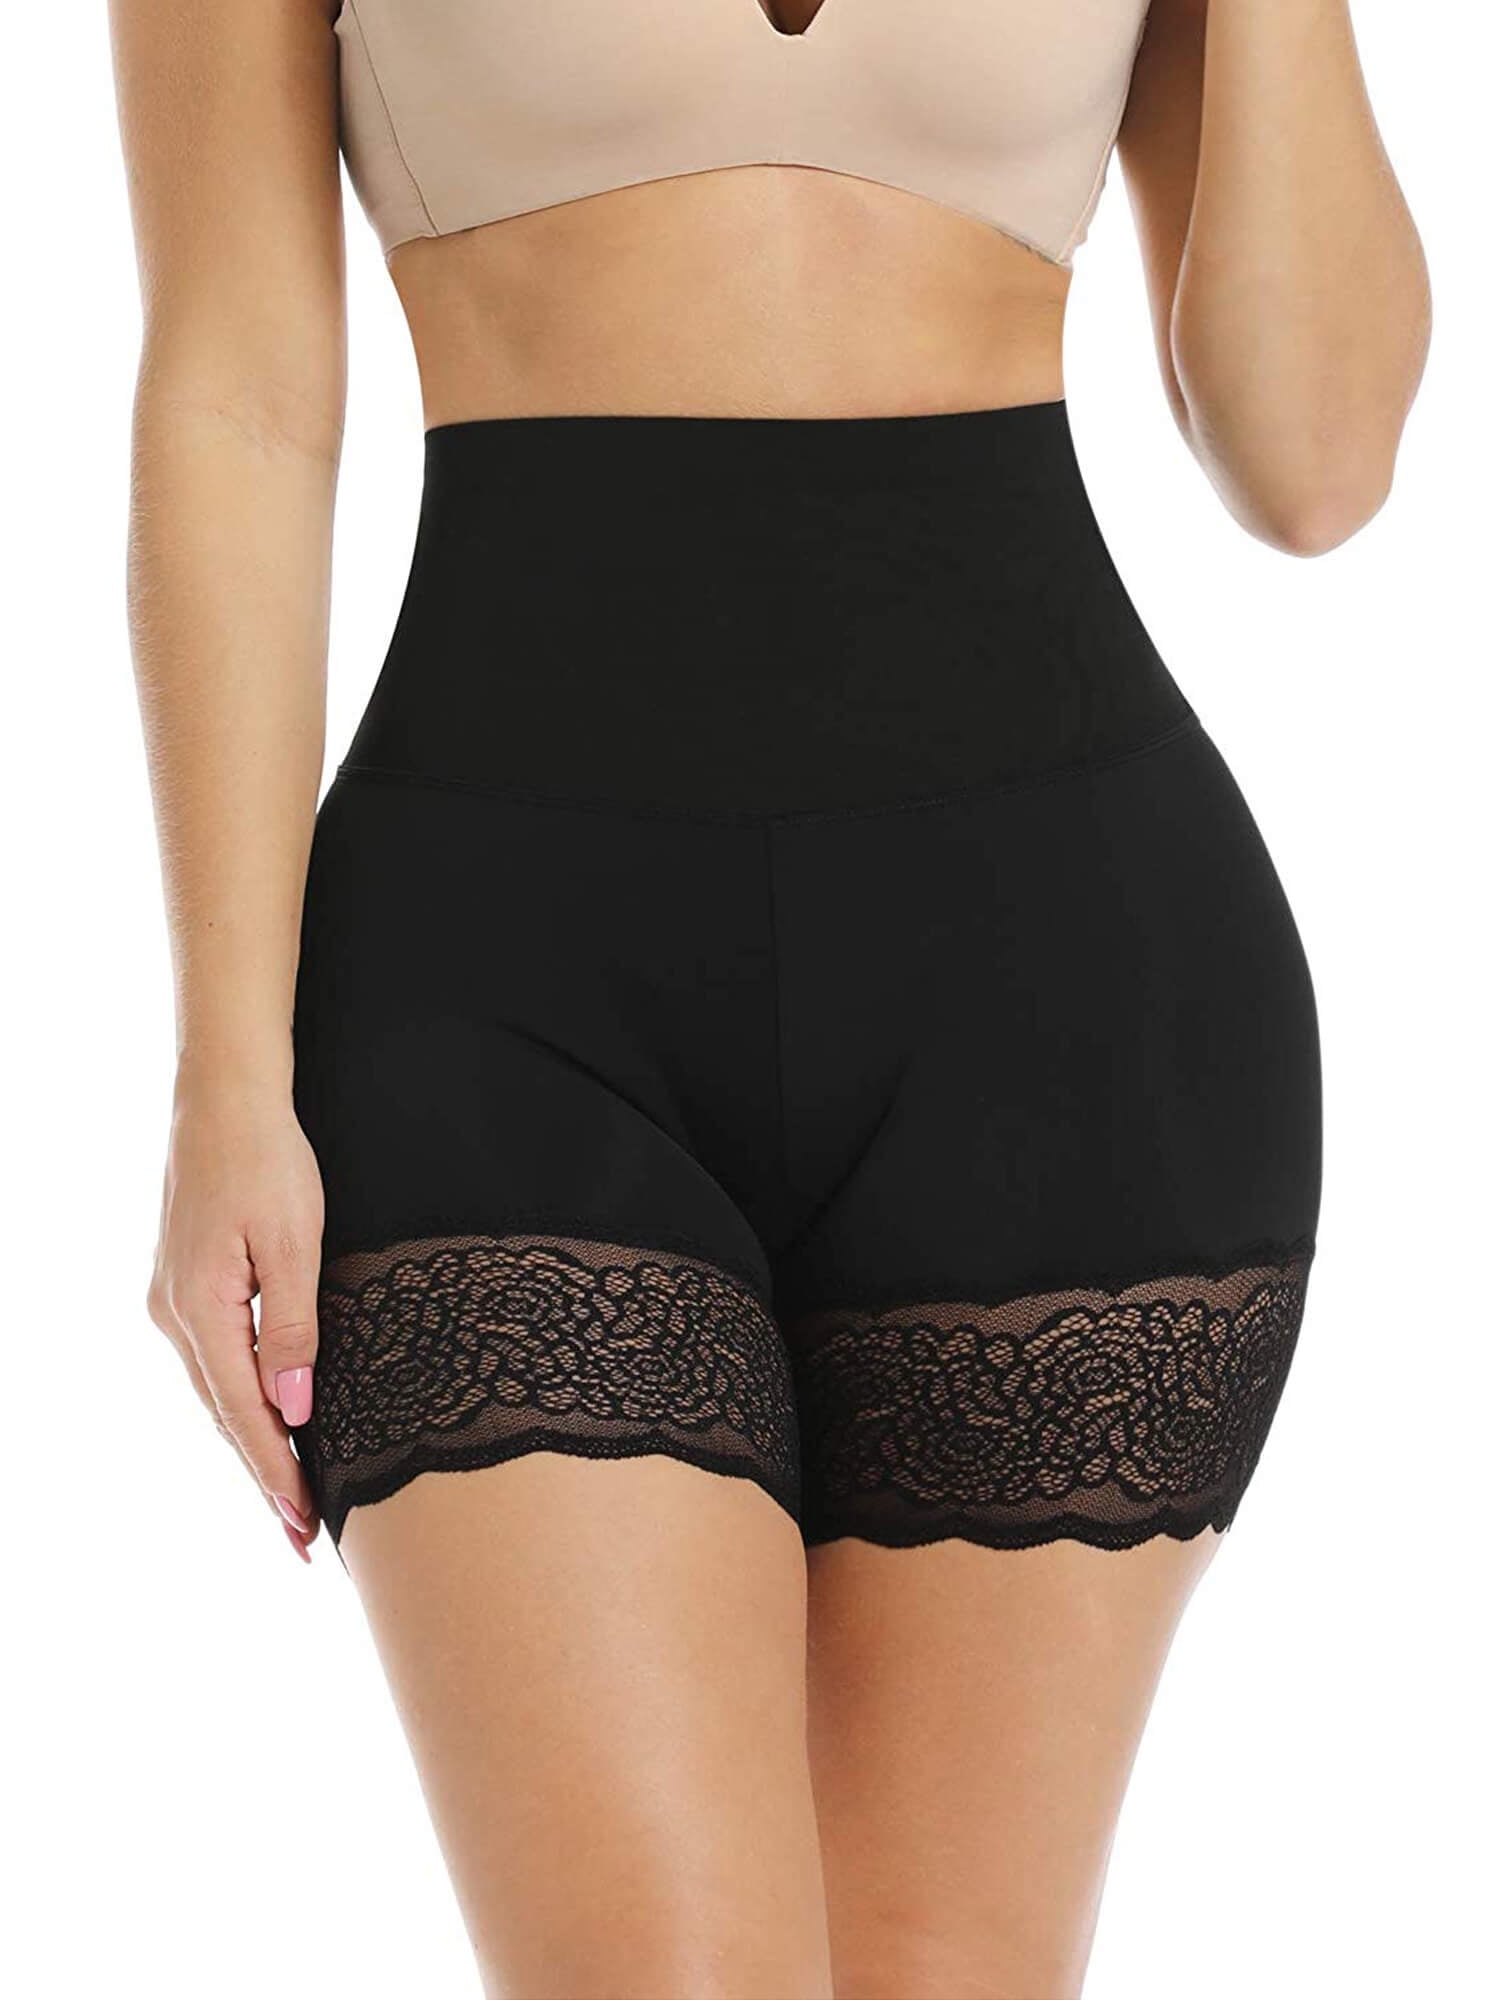 M-XXL MURTIAL Slip Shorts for Under Dresses Women Elastic Thigh Slimmer Underwear Lace Panty Tummy Control Panties